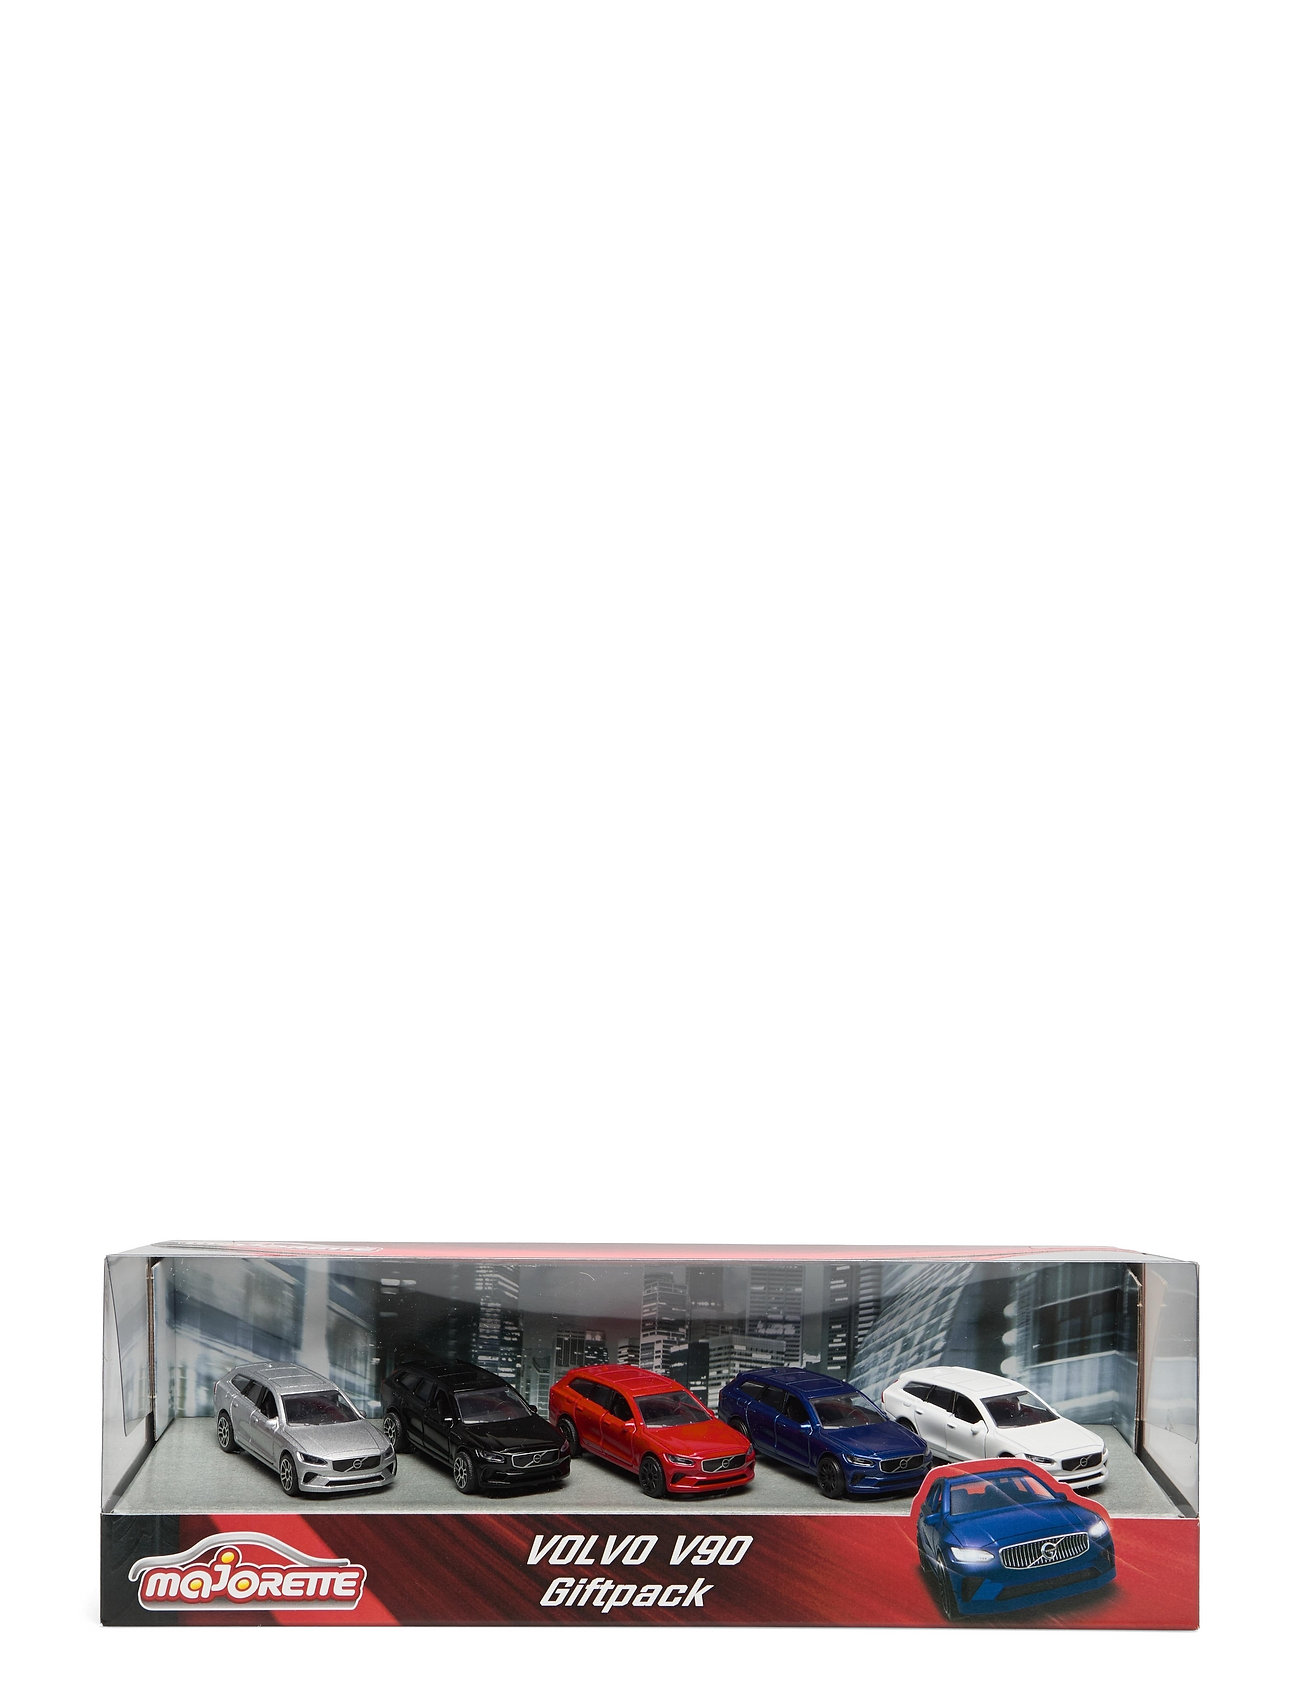 Volvo V90, 5 Pieces Giftpack Toys Toy Cars & Vehicles Toy Cars Multi/mönstrad Majorette